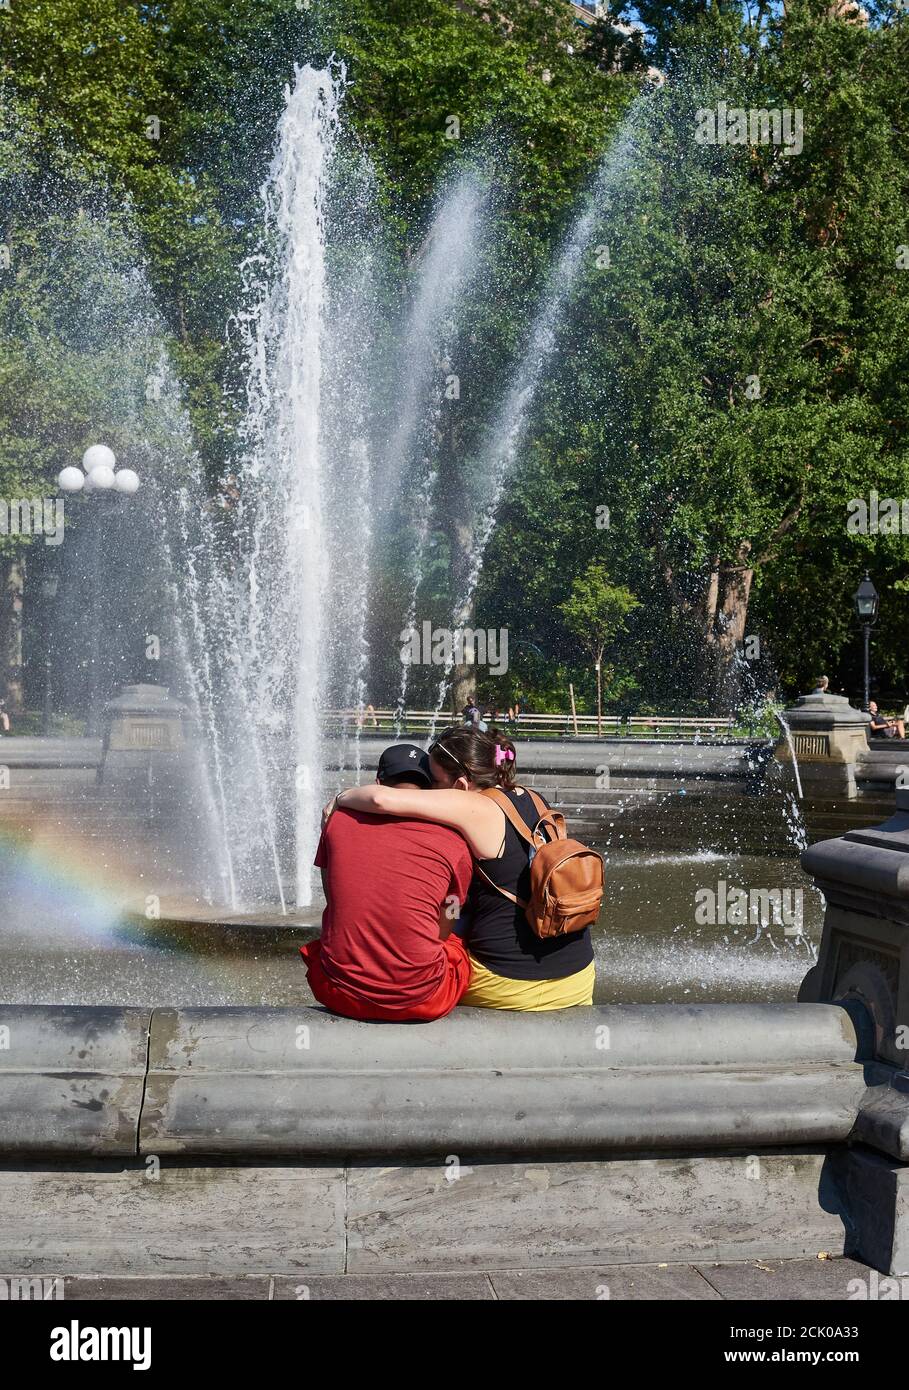 NEW YORK, NY - SEPTEMBER 8 2020: A couple embrace, as they sit in front of the fountain in Washington Square Park. Stock Photo